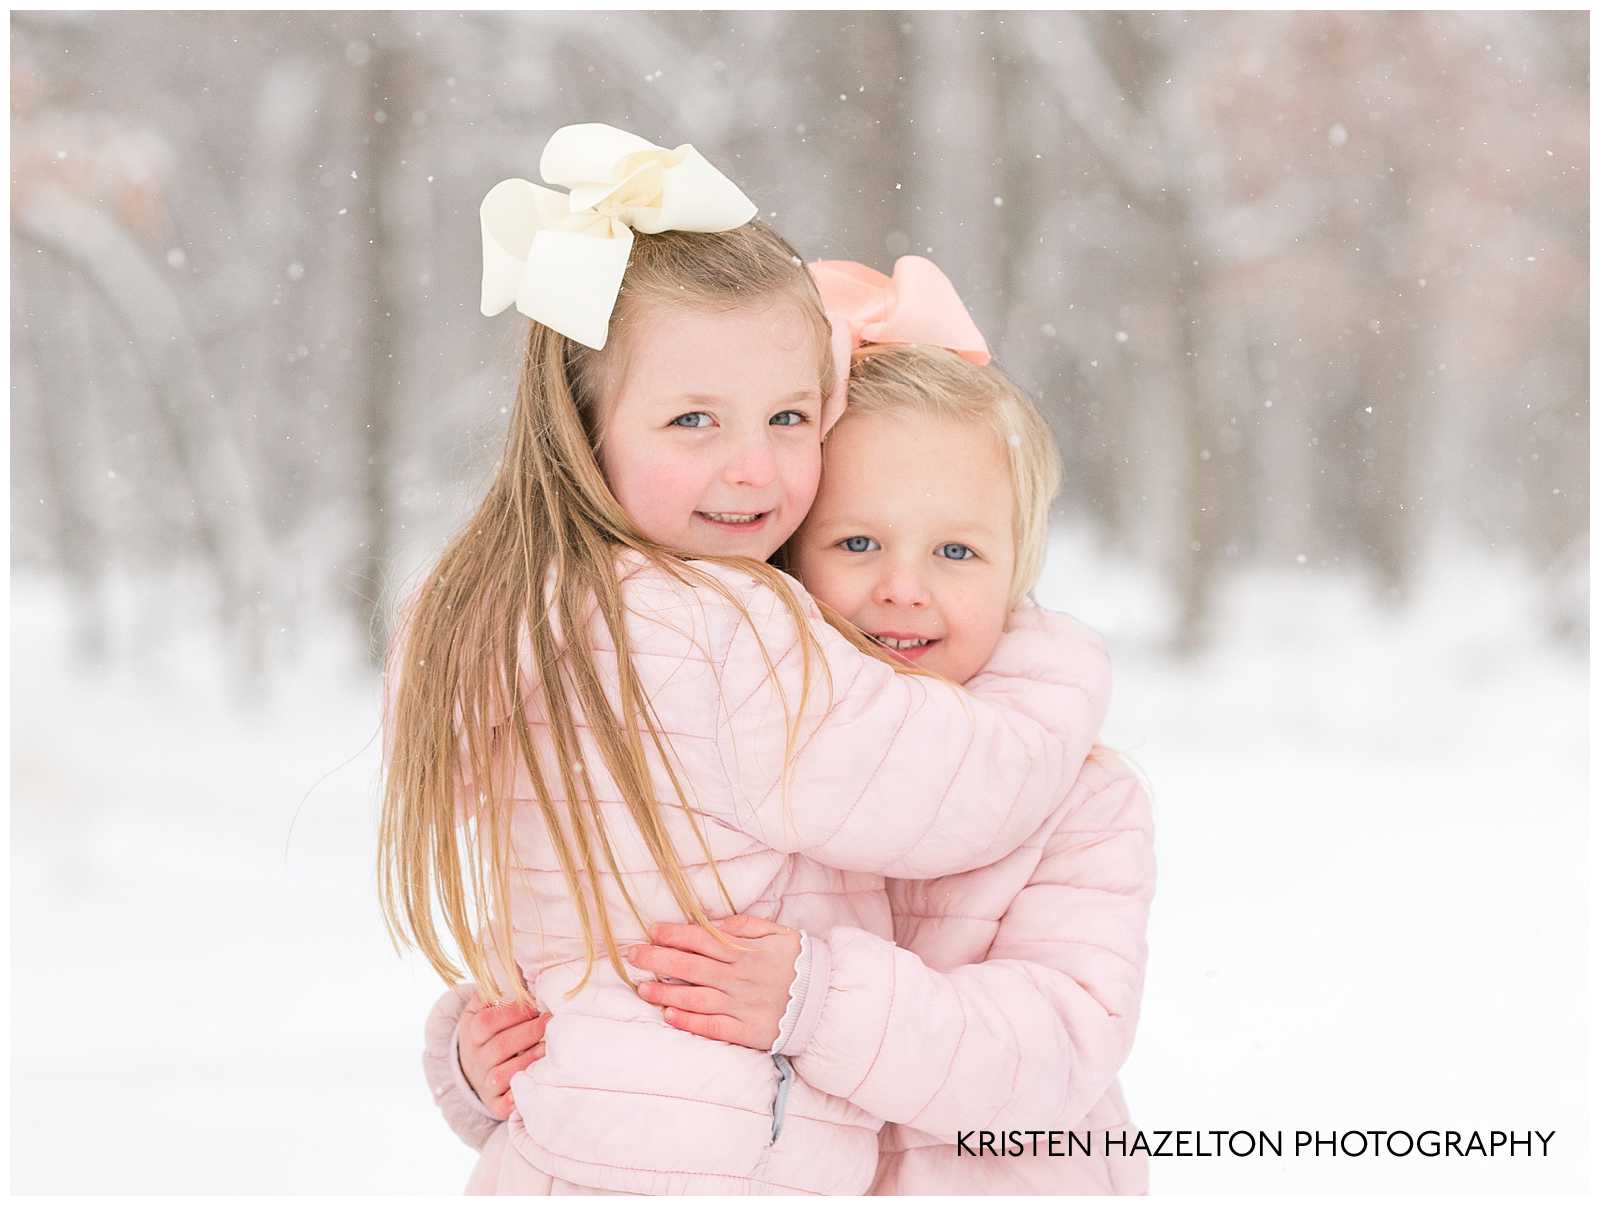 Two young sisters wearing pink jackets and hugging each other in the snow